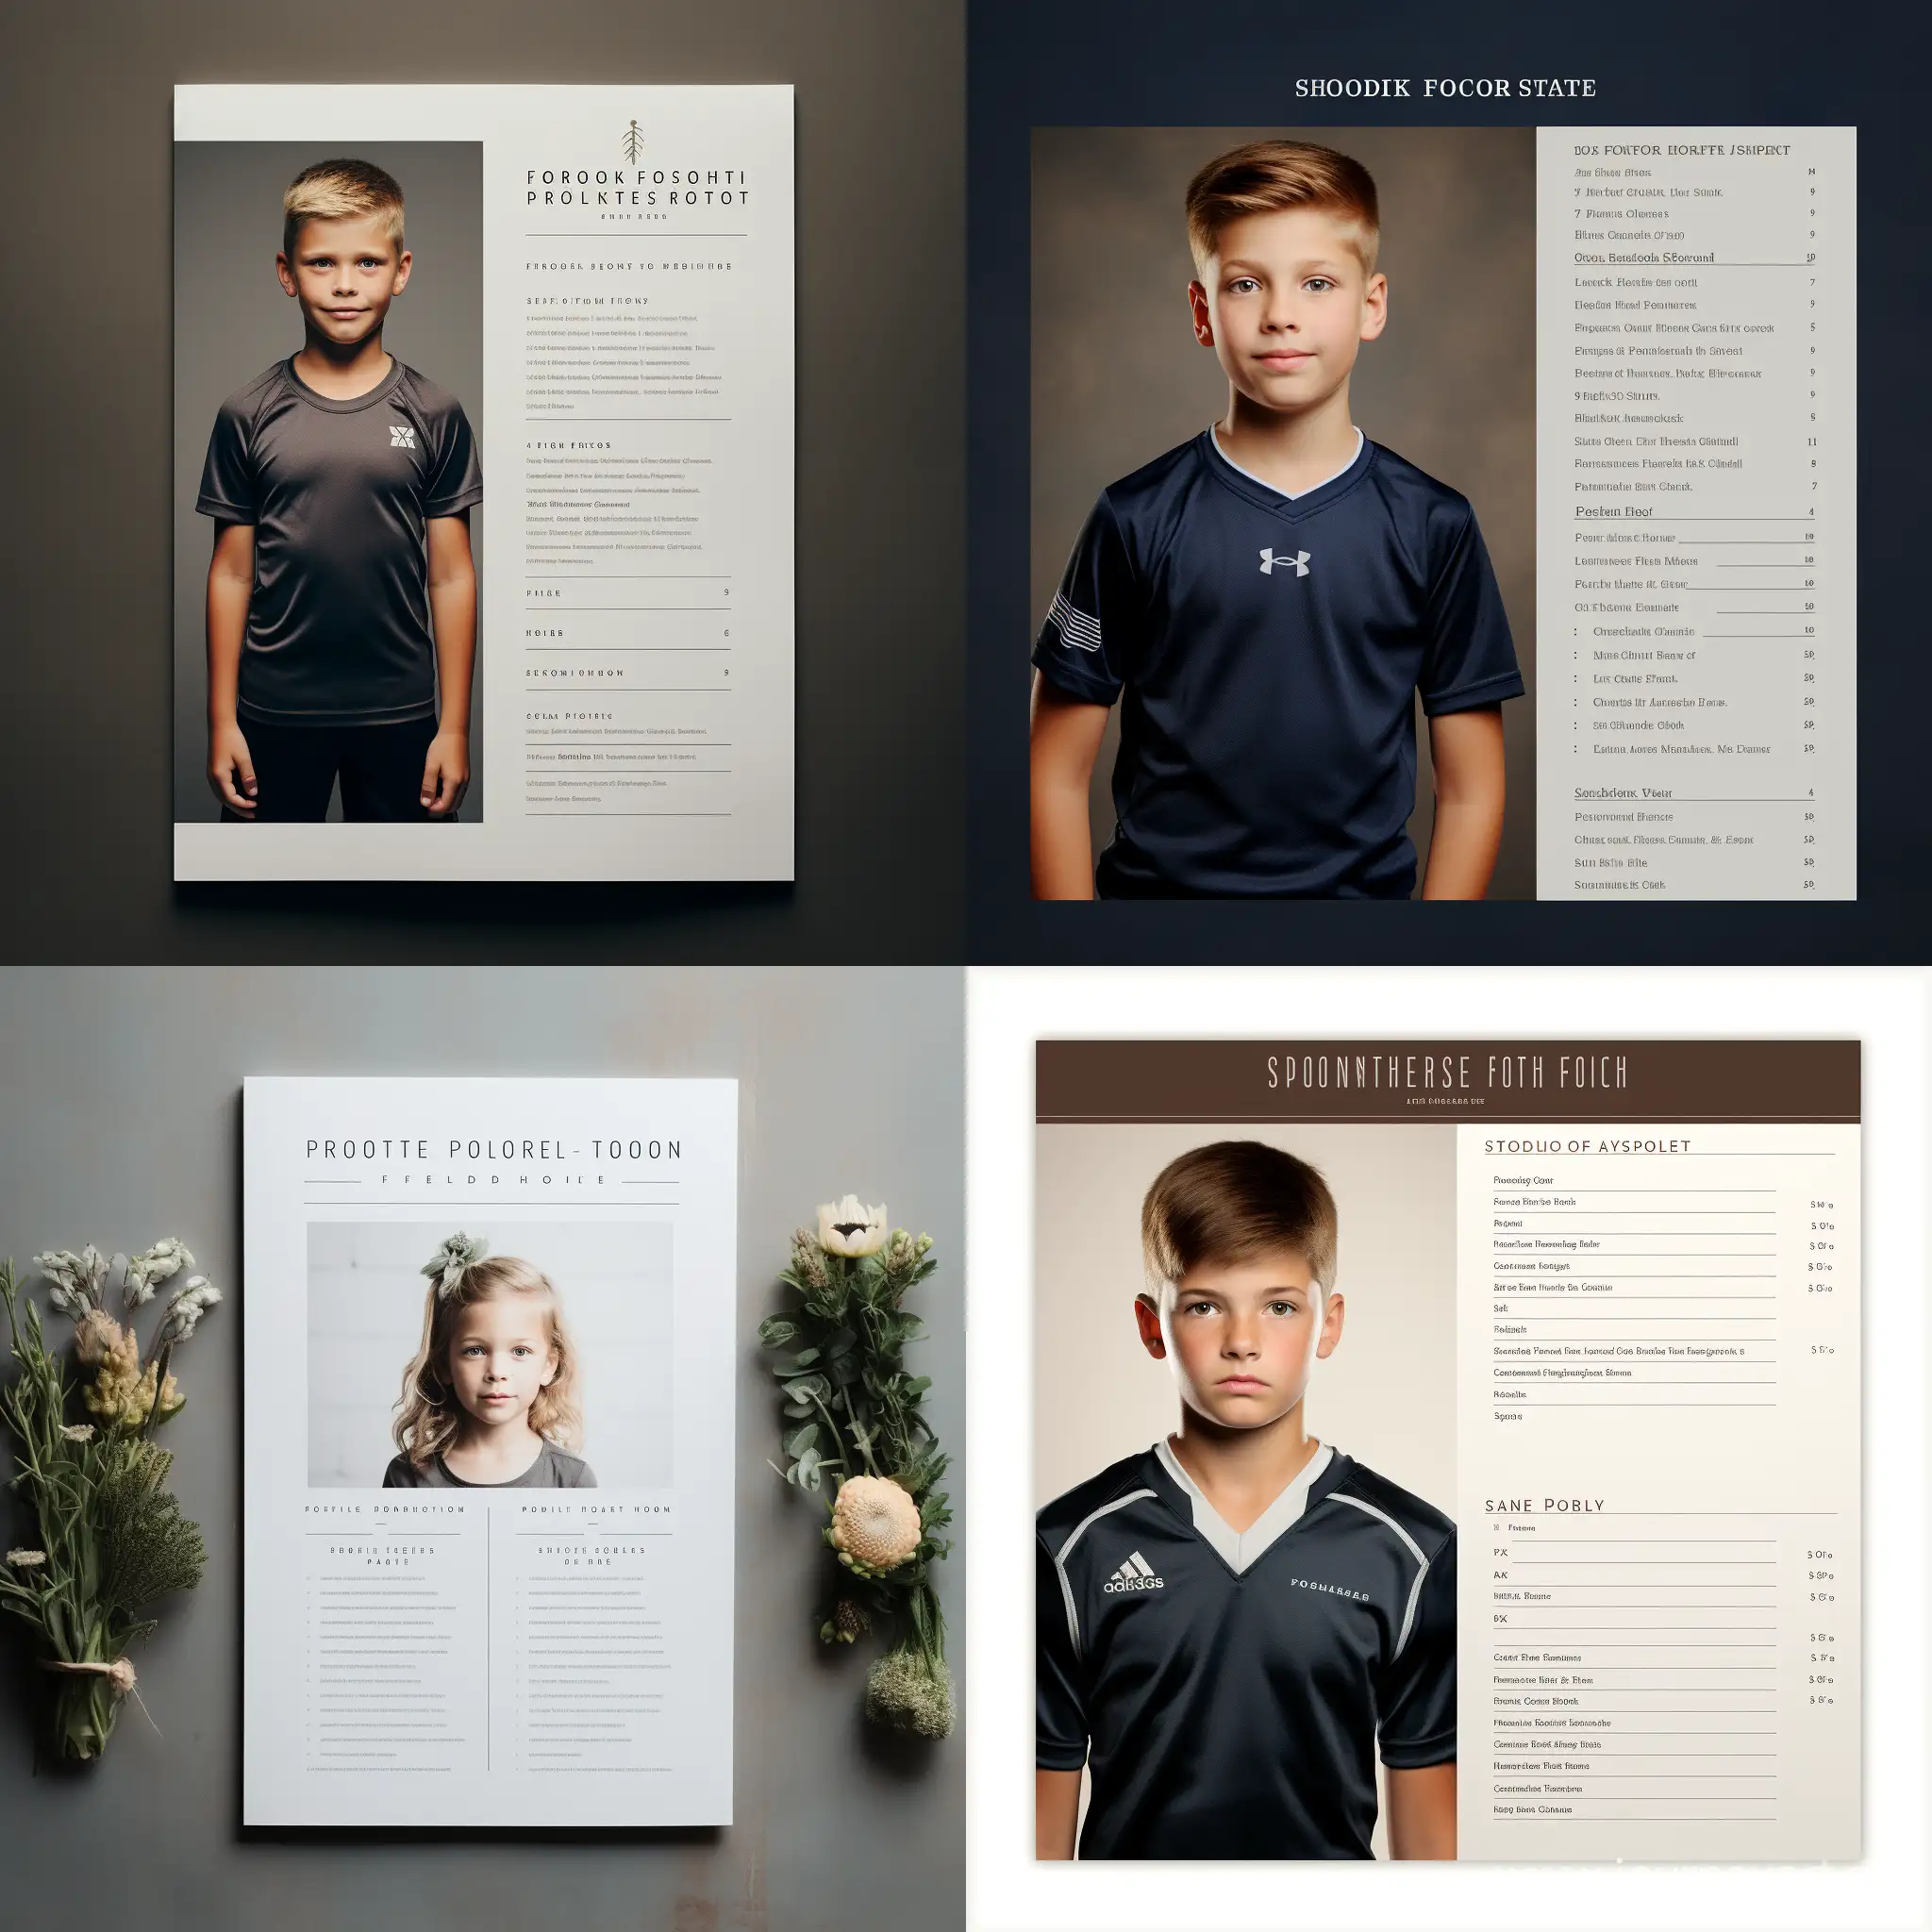 A proof sheet order form for a high volume studio photographer focusing on school and sports photos